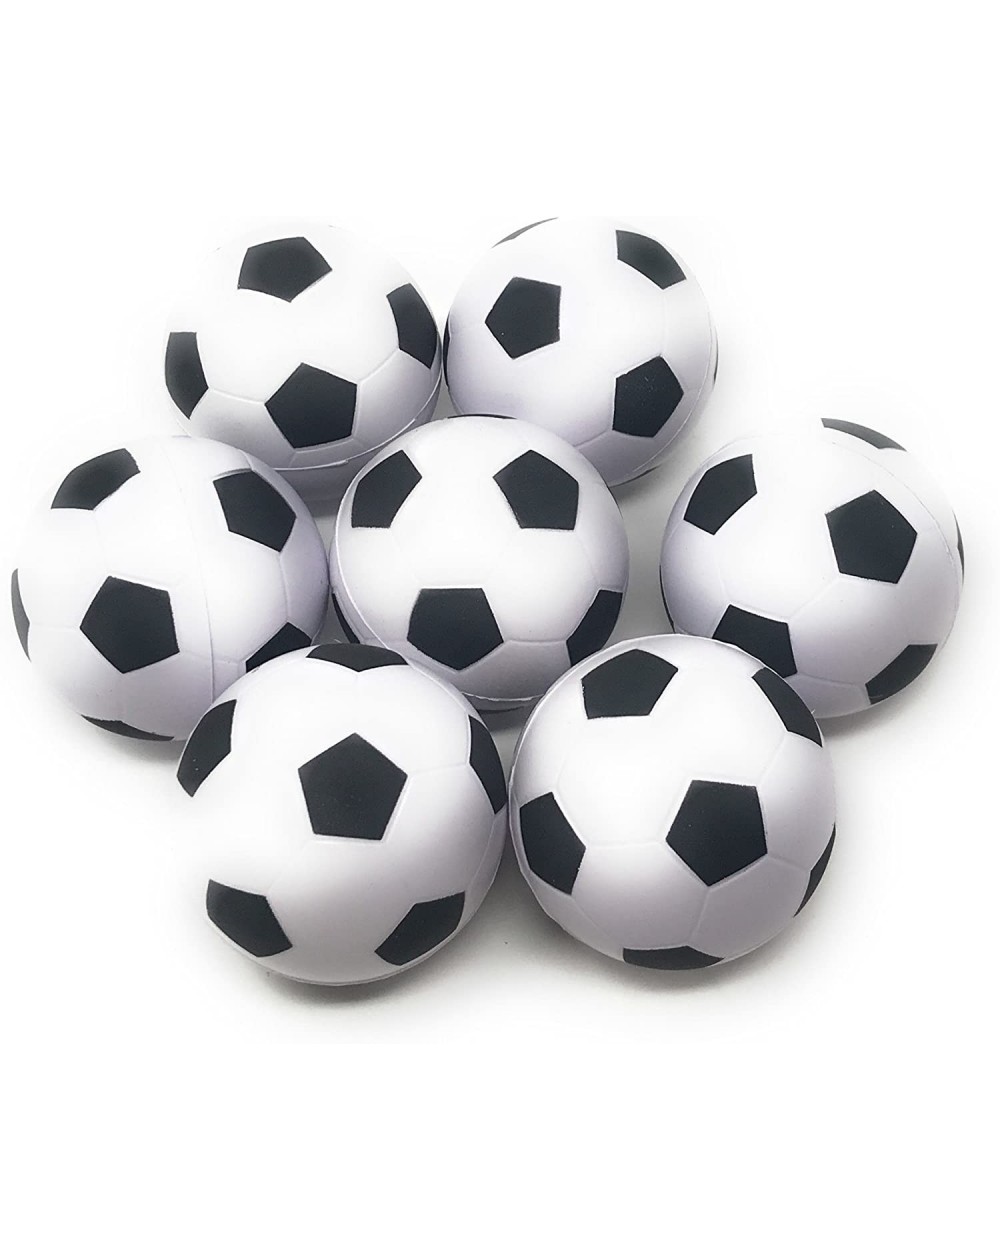 Party Favors 20 Bulk 3" Soccer Ball Stress Relievers - Adult or Kid Hand Sized - CX18990YTMW $15.14